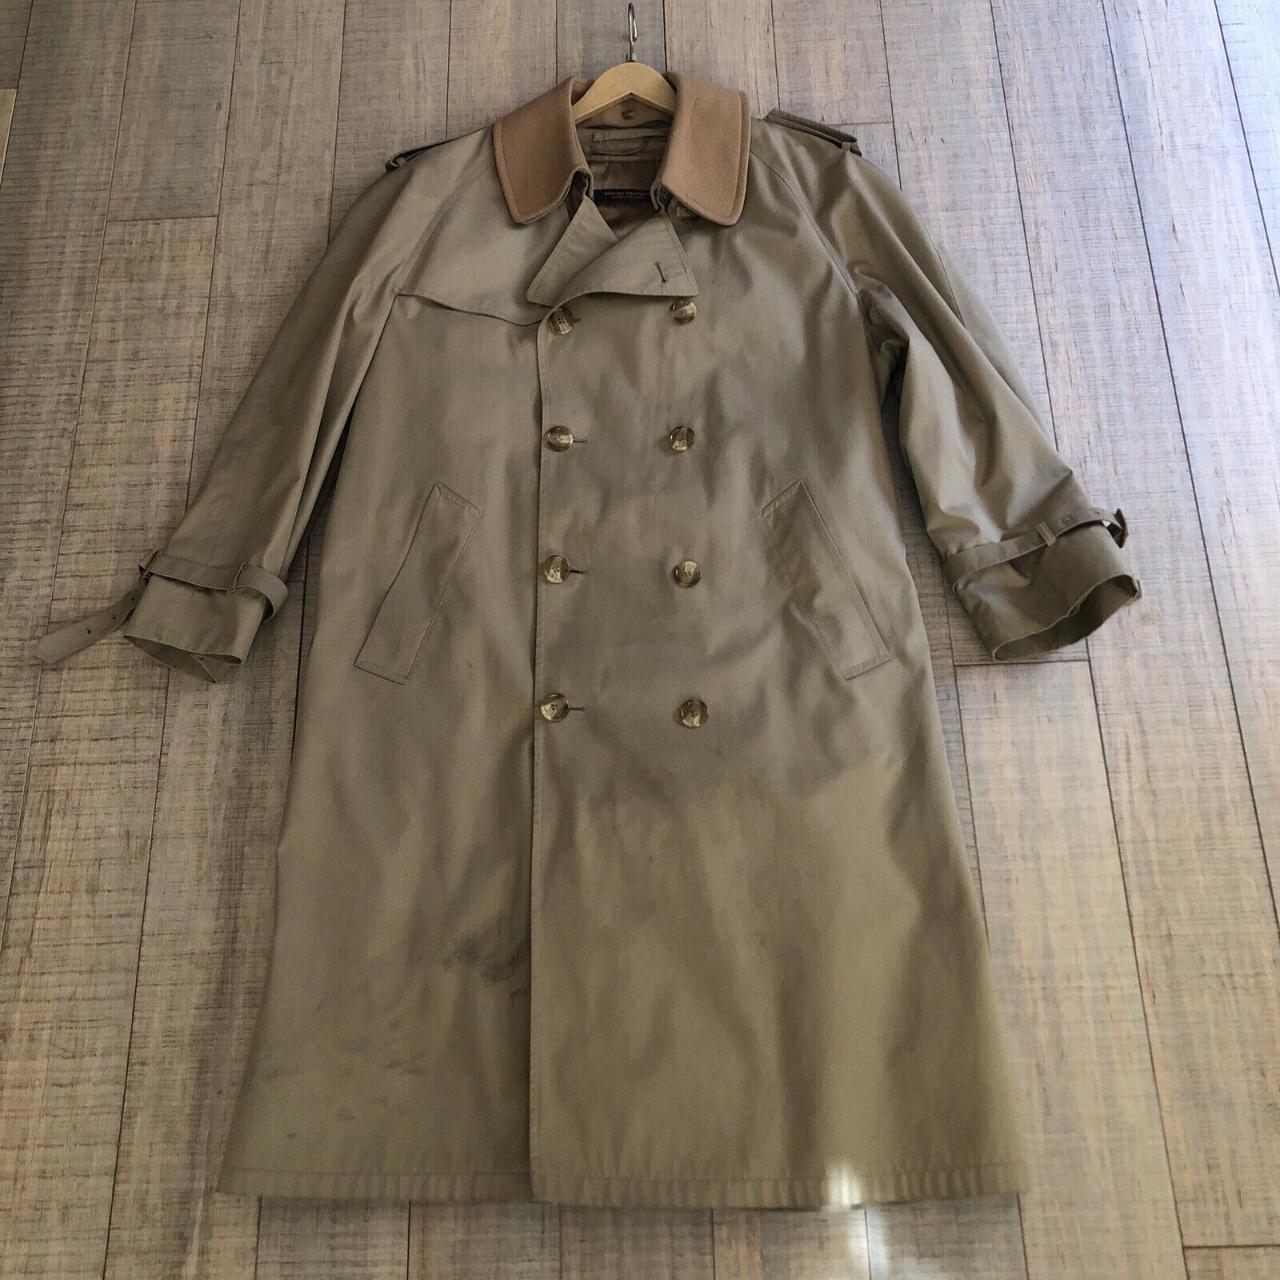 Classic BROOKS BROTHERS Double-Breasted Trench Coat... - Depop